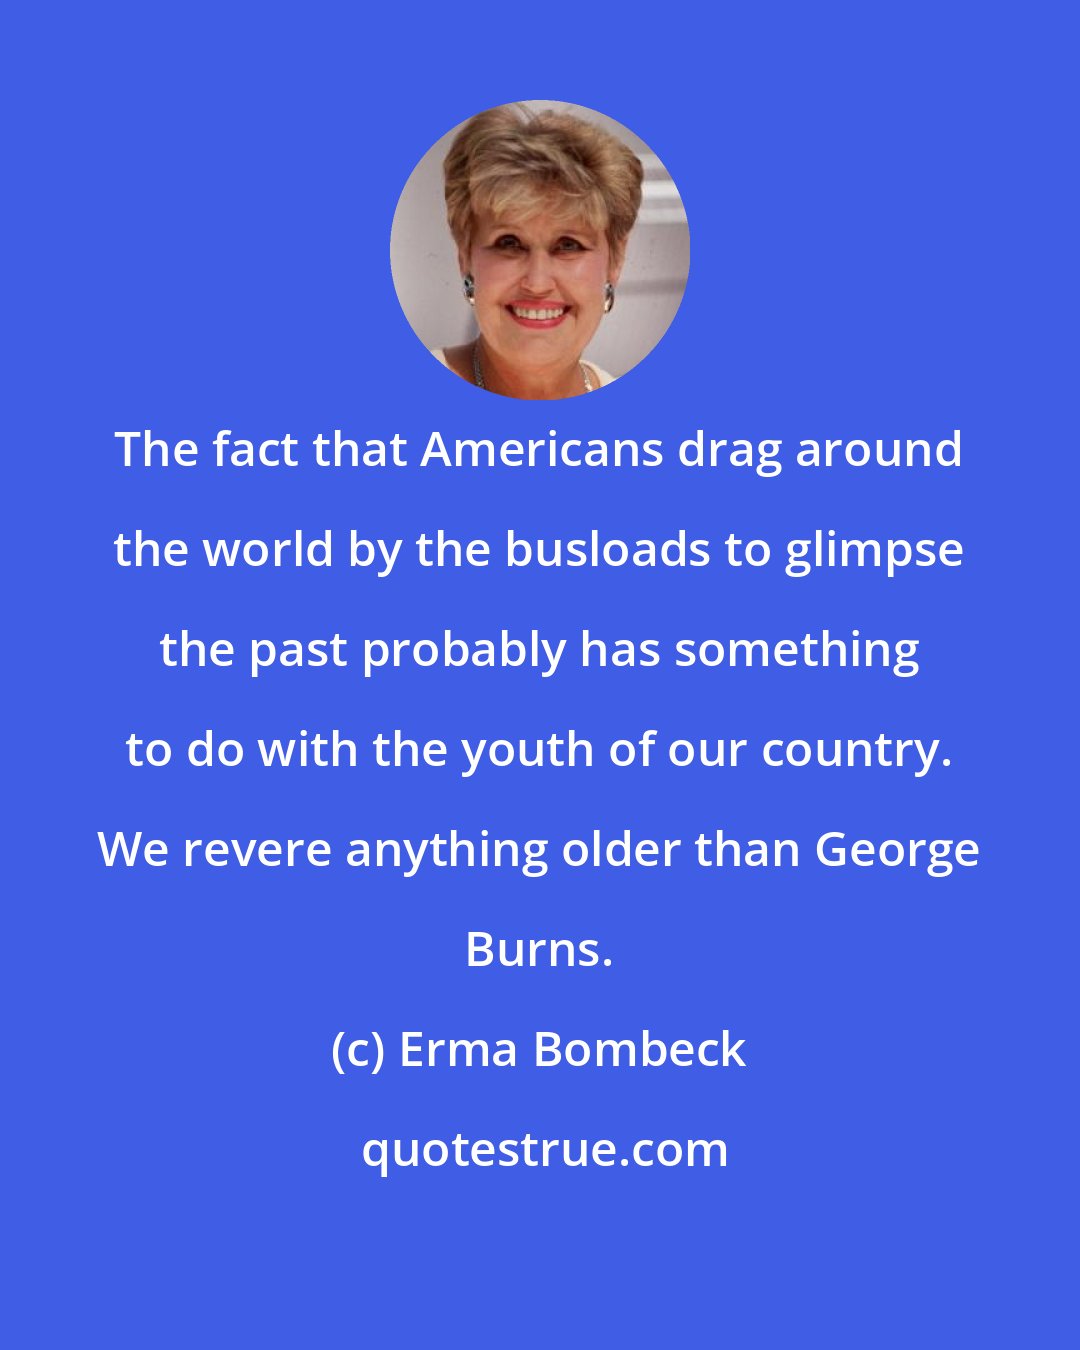 Erma Bombeck: The fact that Americans drag around the world by the busloads to glimpse the past probably has something to do with the youth of our country. We revere anything older than George Burns.